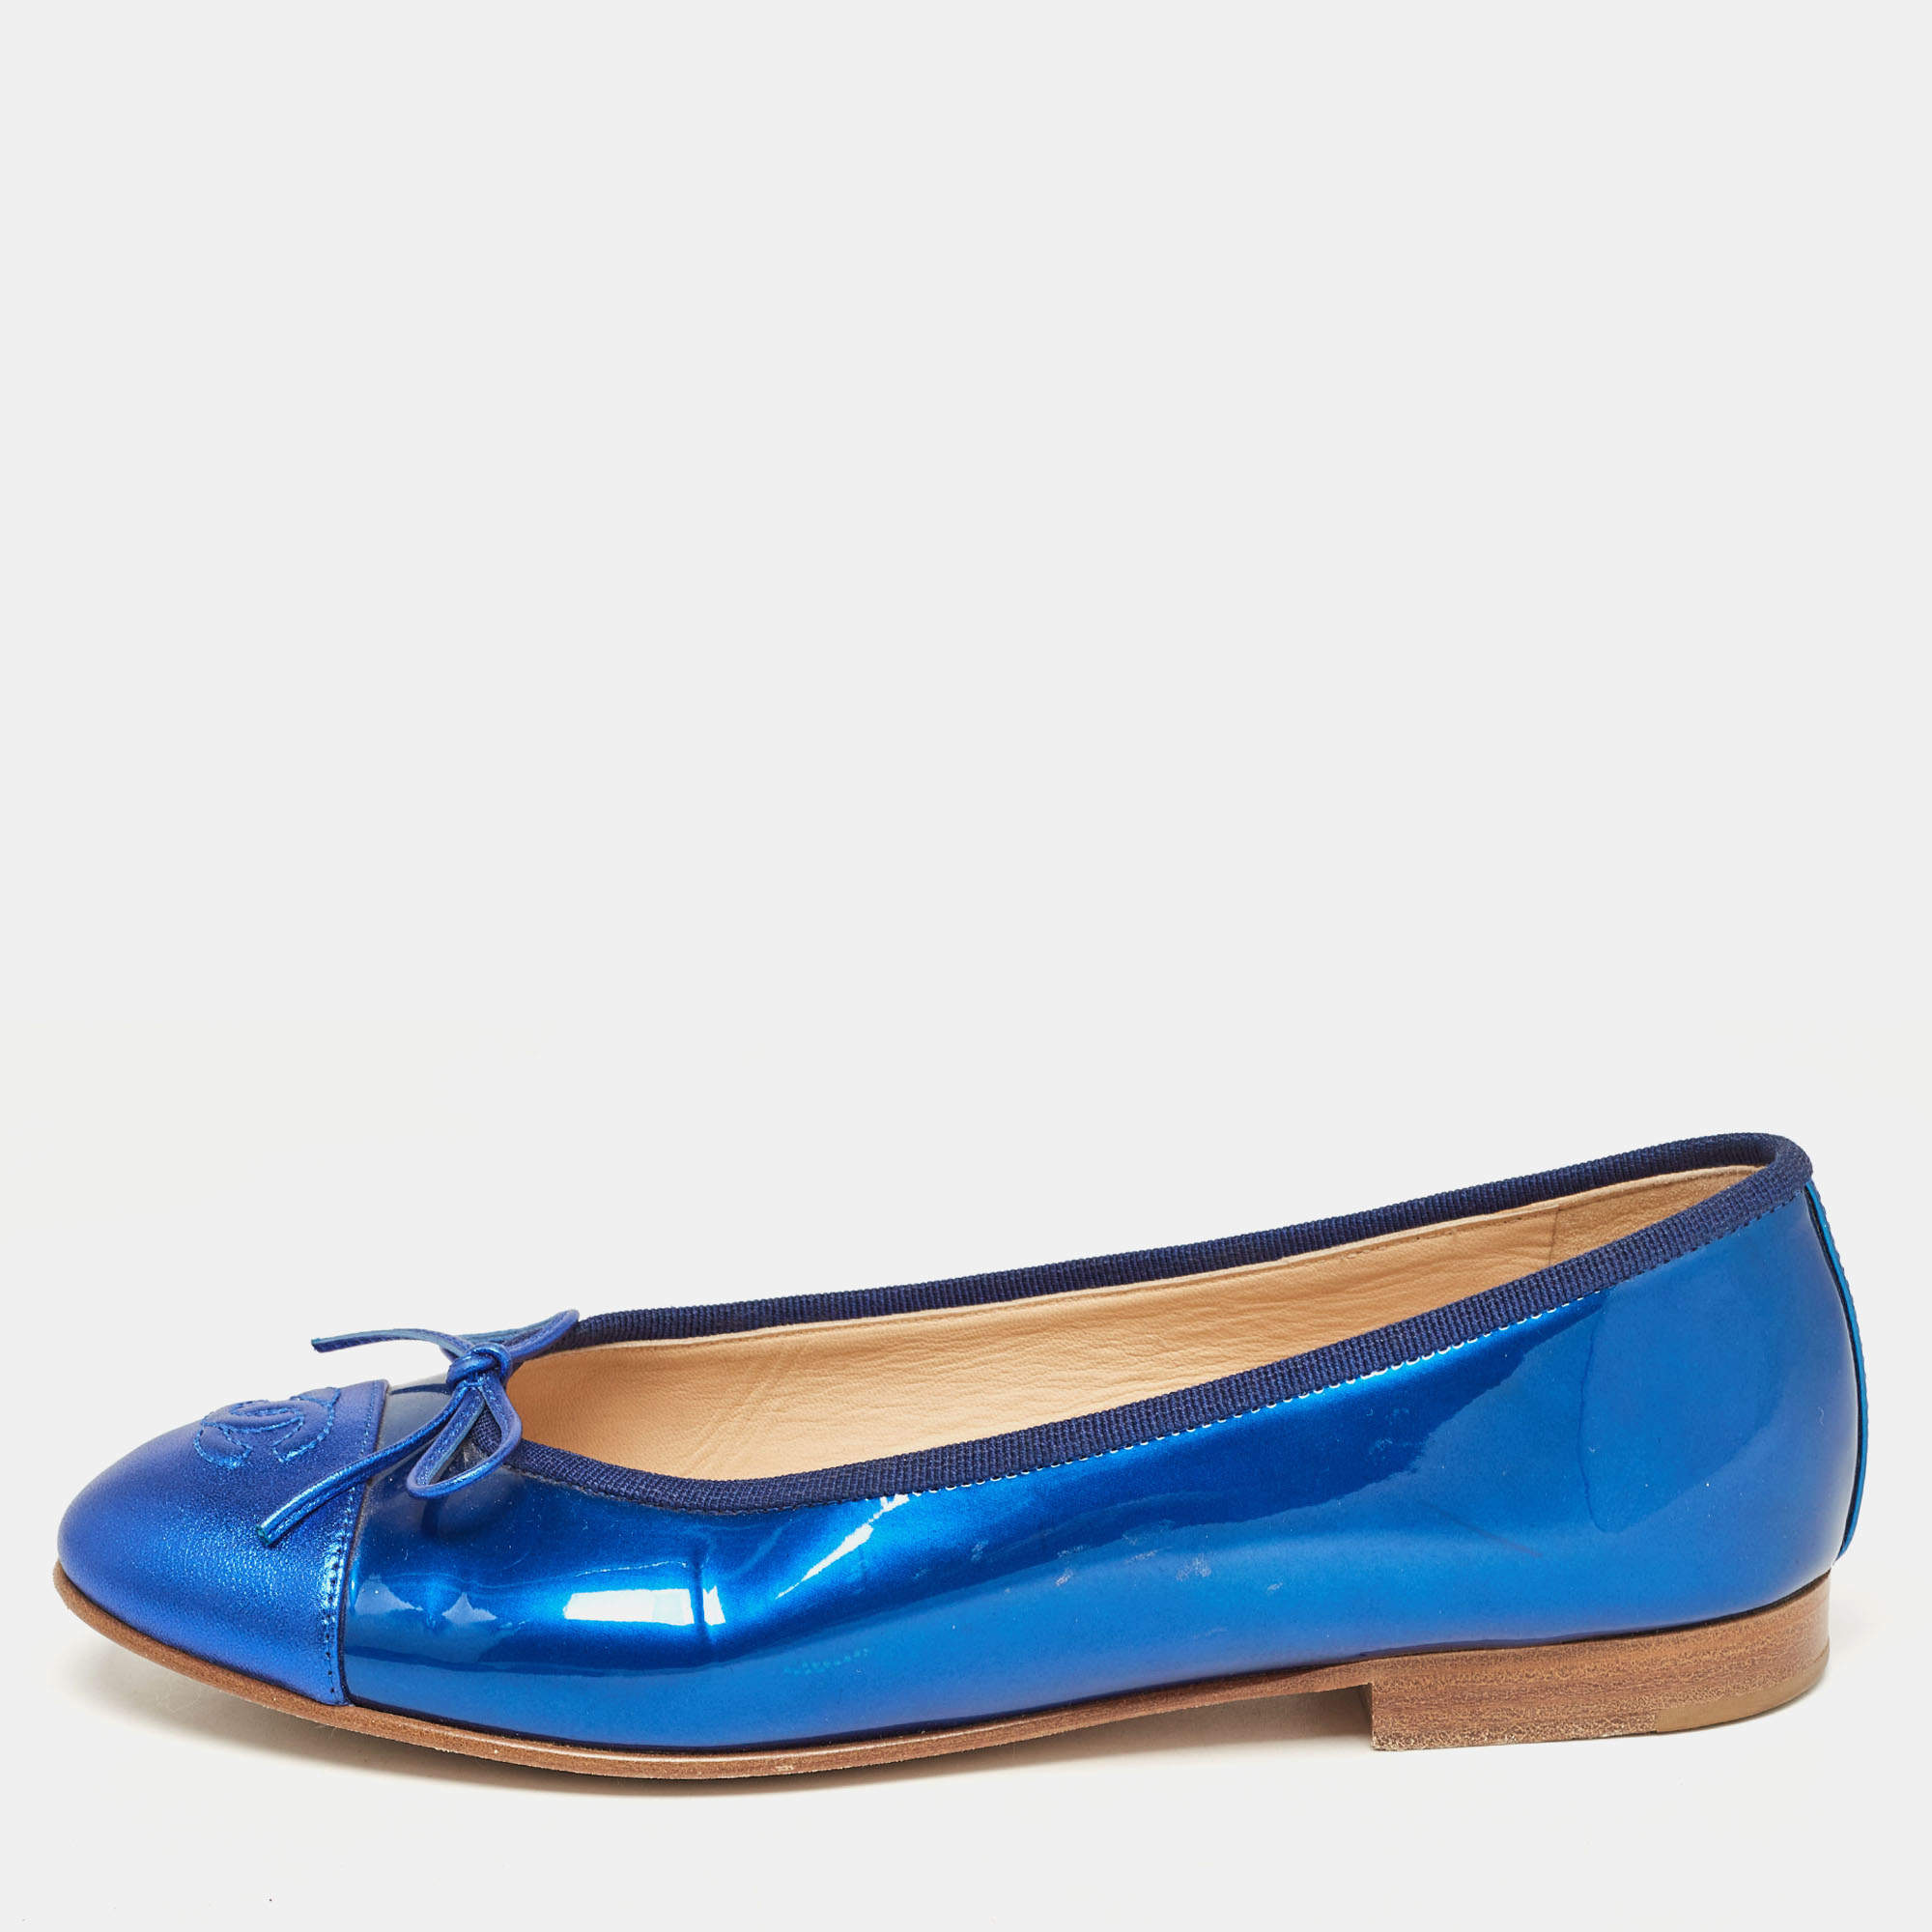 Chanel Blue Patent and Leather CC Cap Toe Bow Ballet Flats Size 38